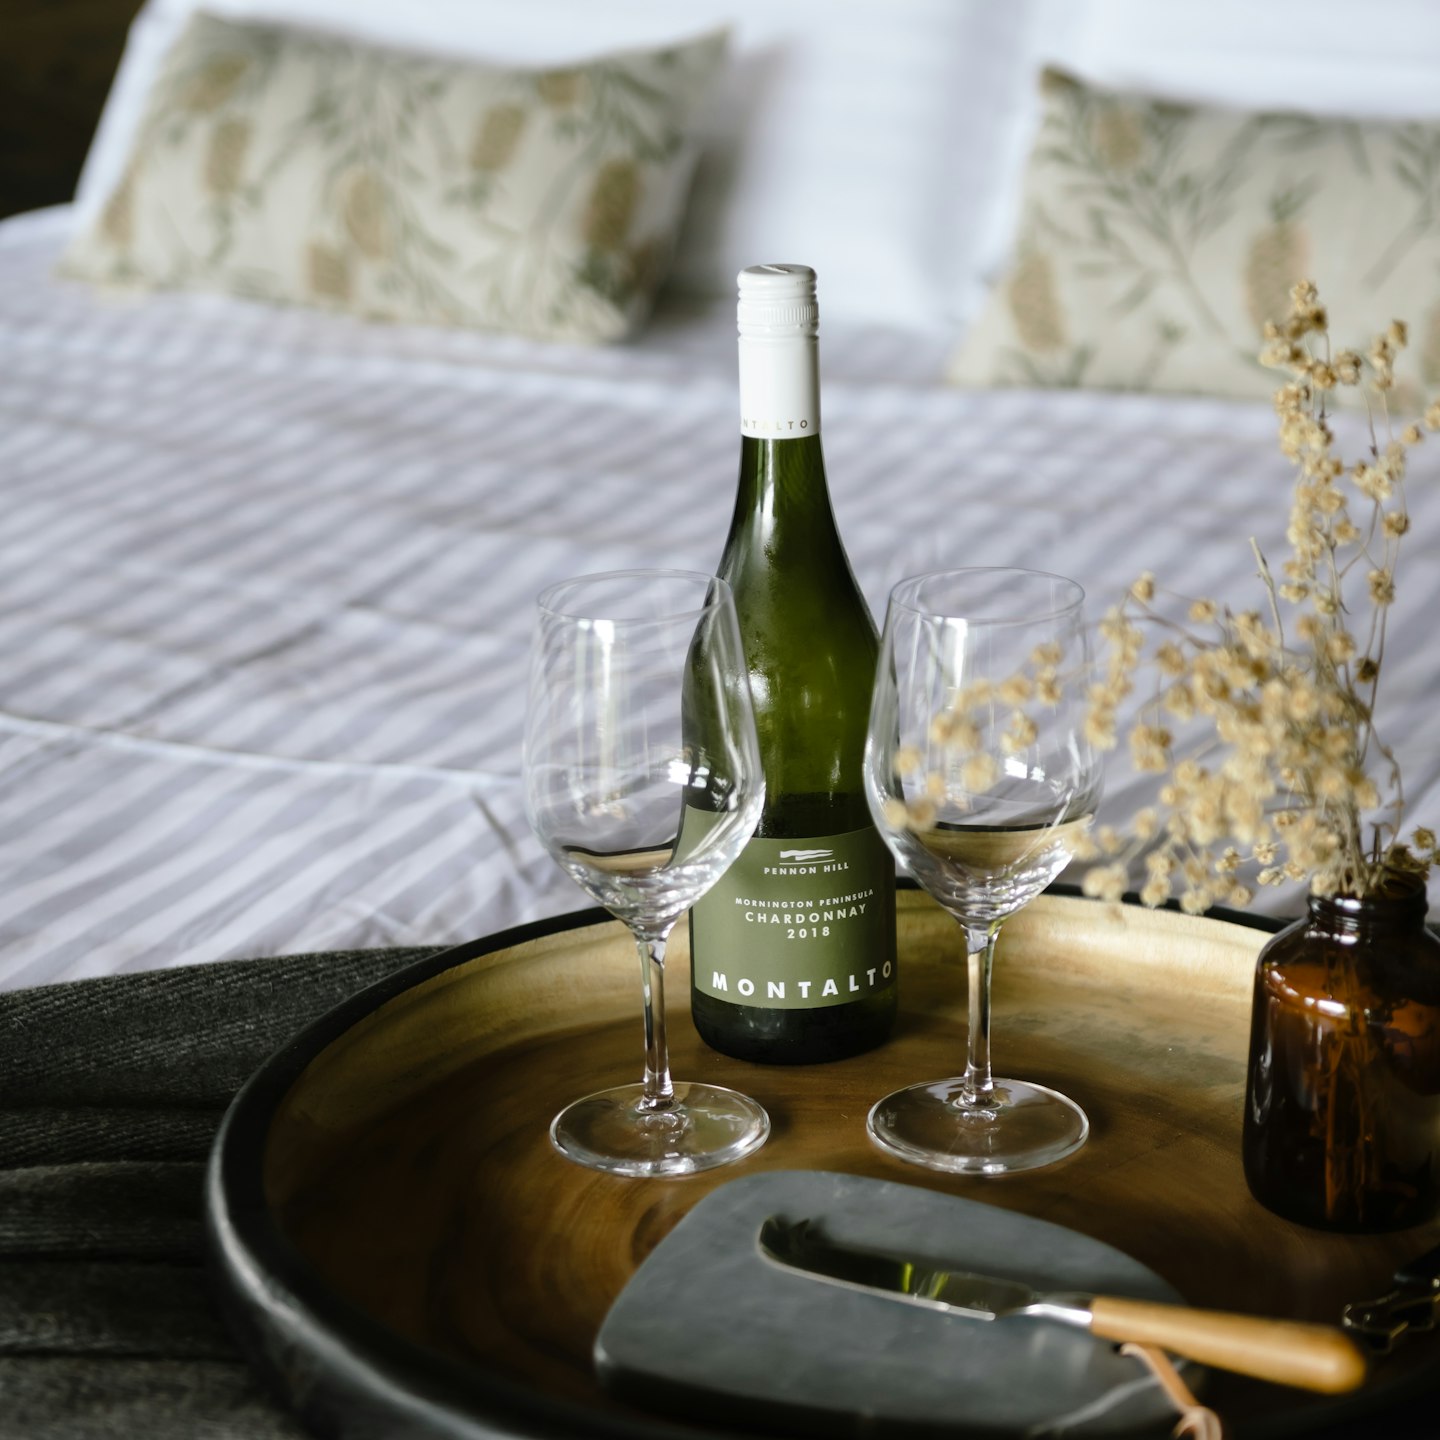 tray on beautifully styled bed with wine, wine glasses and native flowers in glass vase